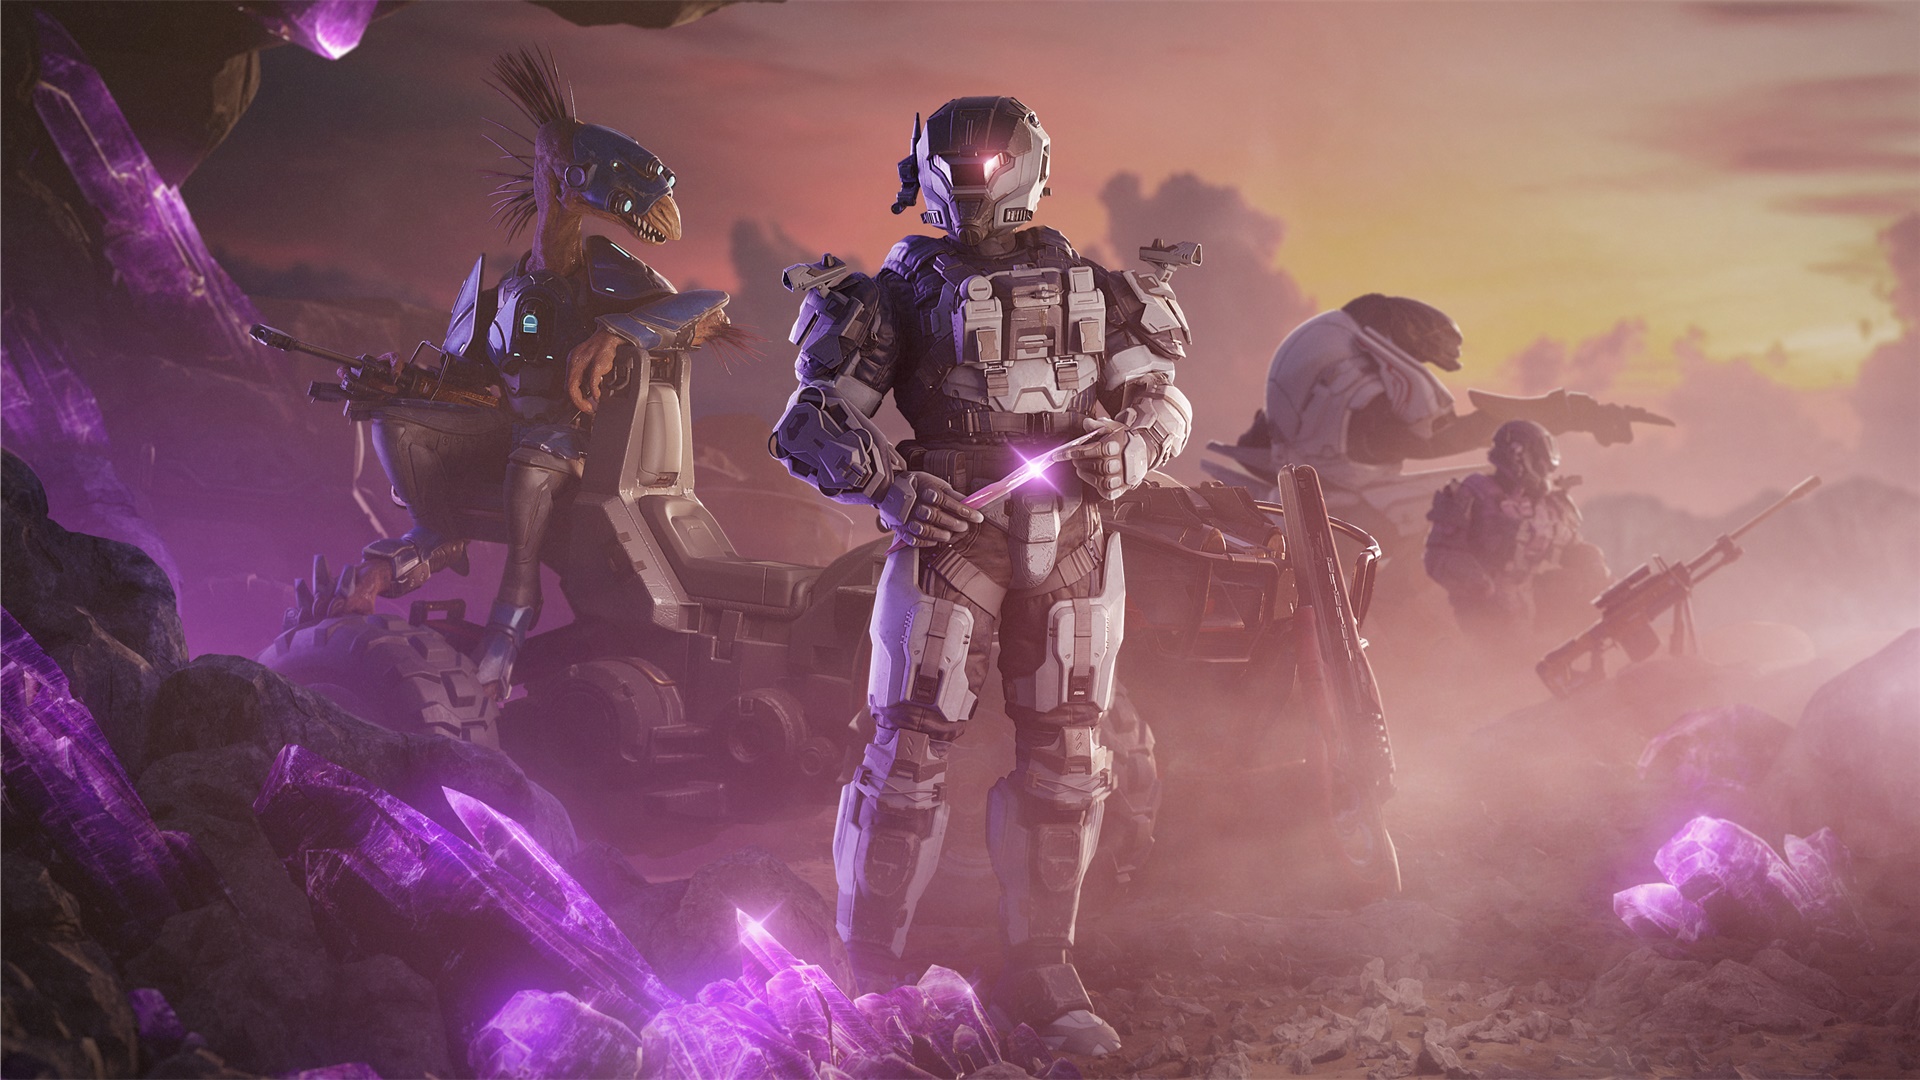 Halo Infinite key art for the Combined Arms Operation showing (from left-to-right) a Kig-Yar sat on the back of a Mongoose, a Spartan holding a shard of blamite, a Sangheili Ultra without a helmet, and another Spartan kneeling